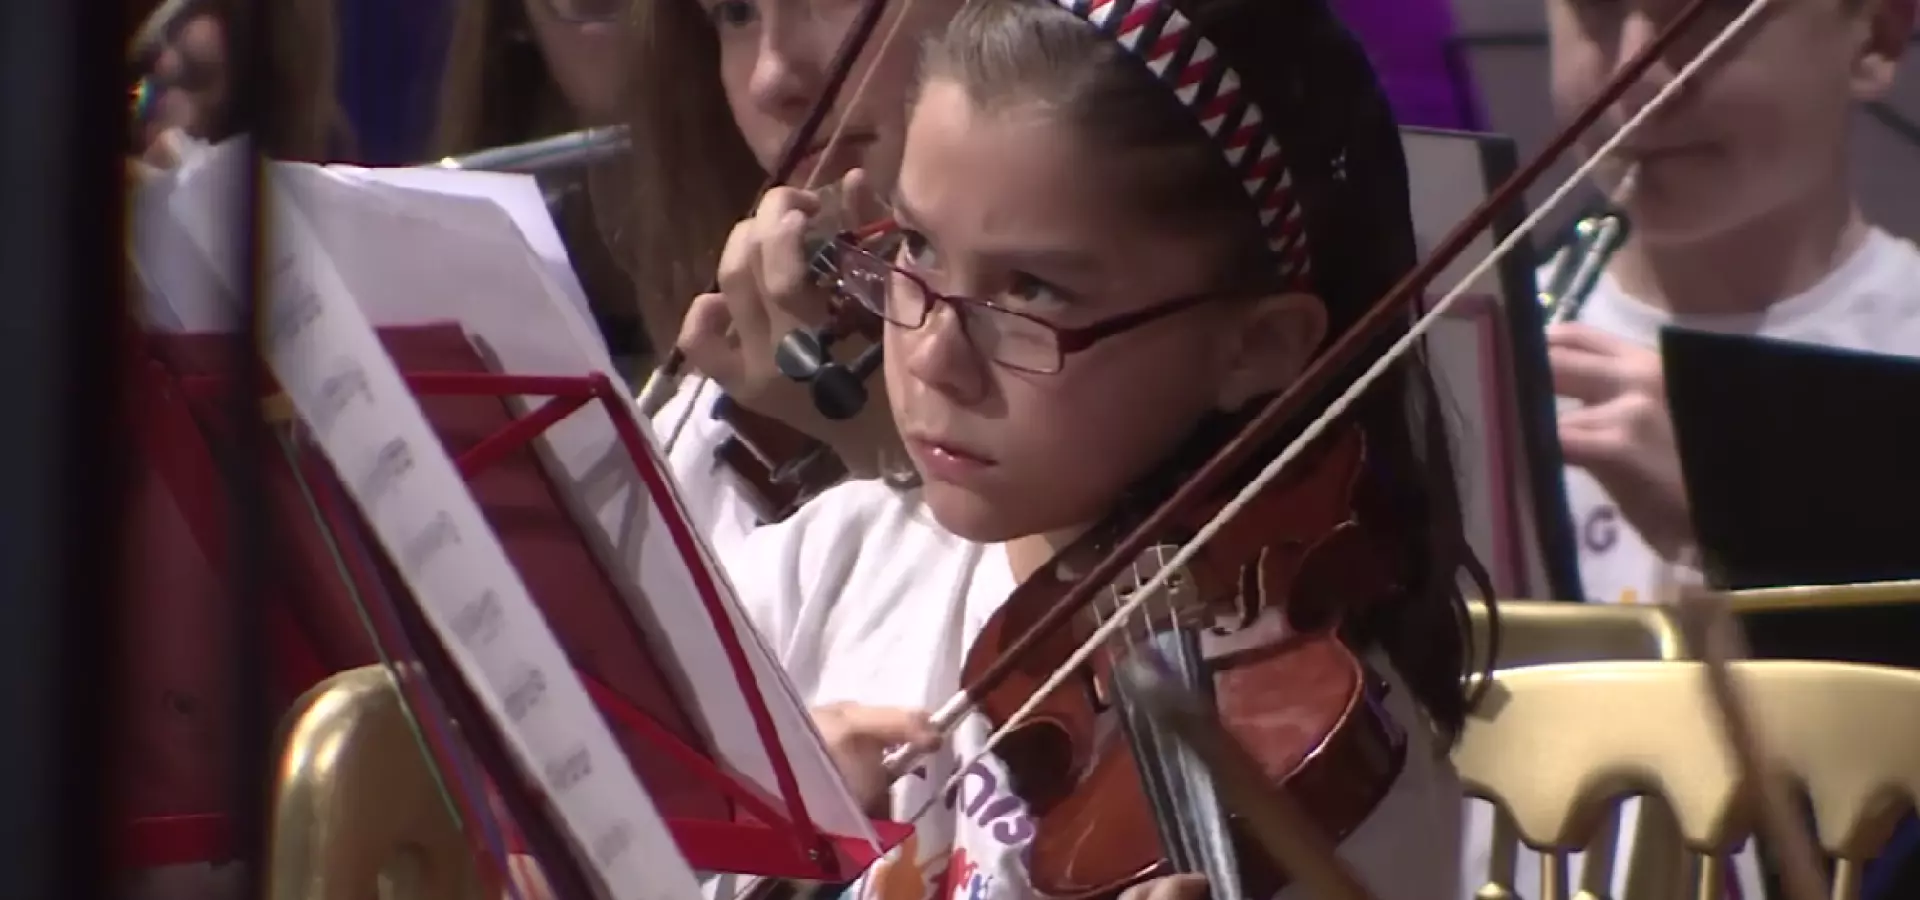 Young girl playing the fiddle, with other young musicians in the background.